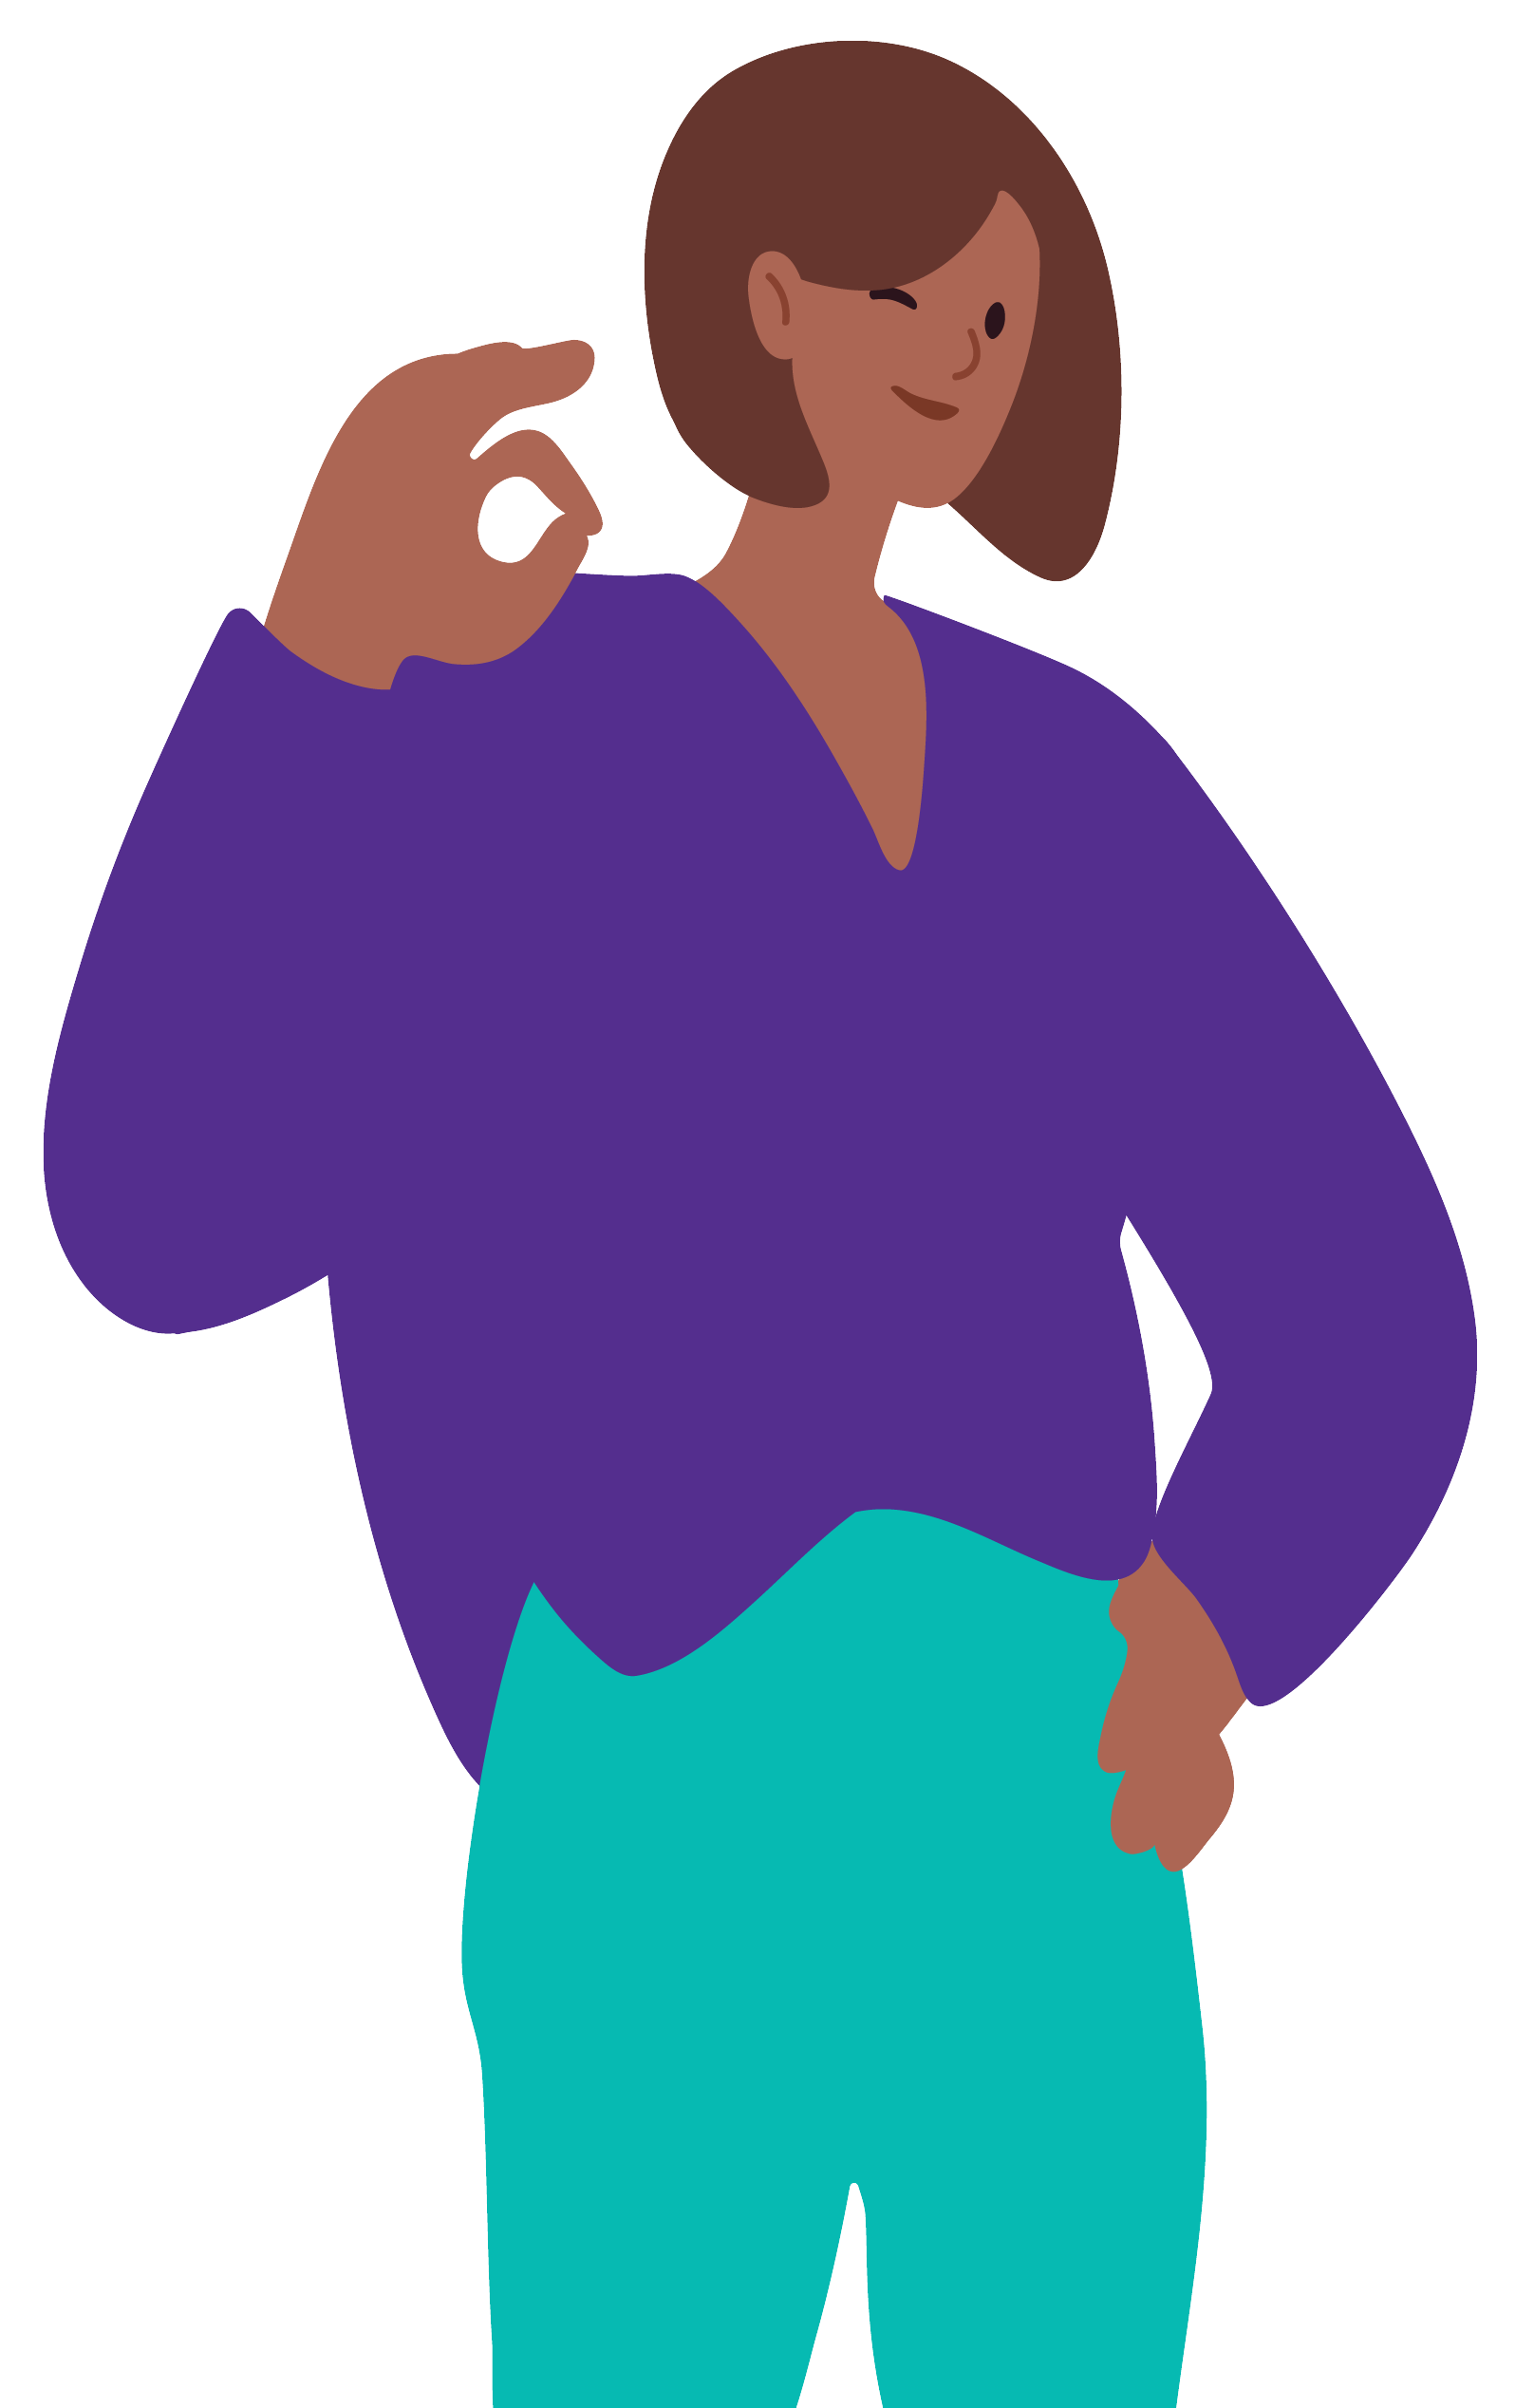 Illustration of a woman winking and giving the ok hand sign